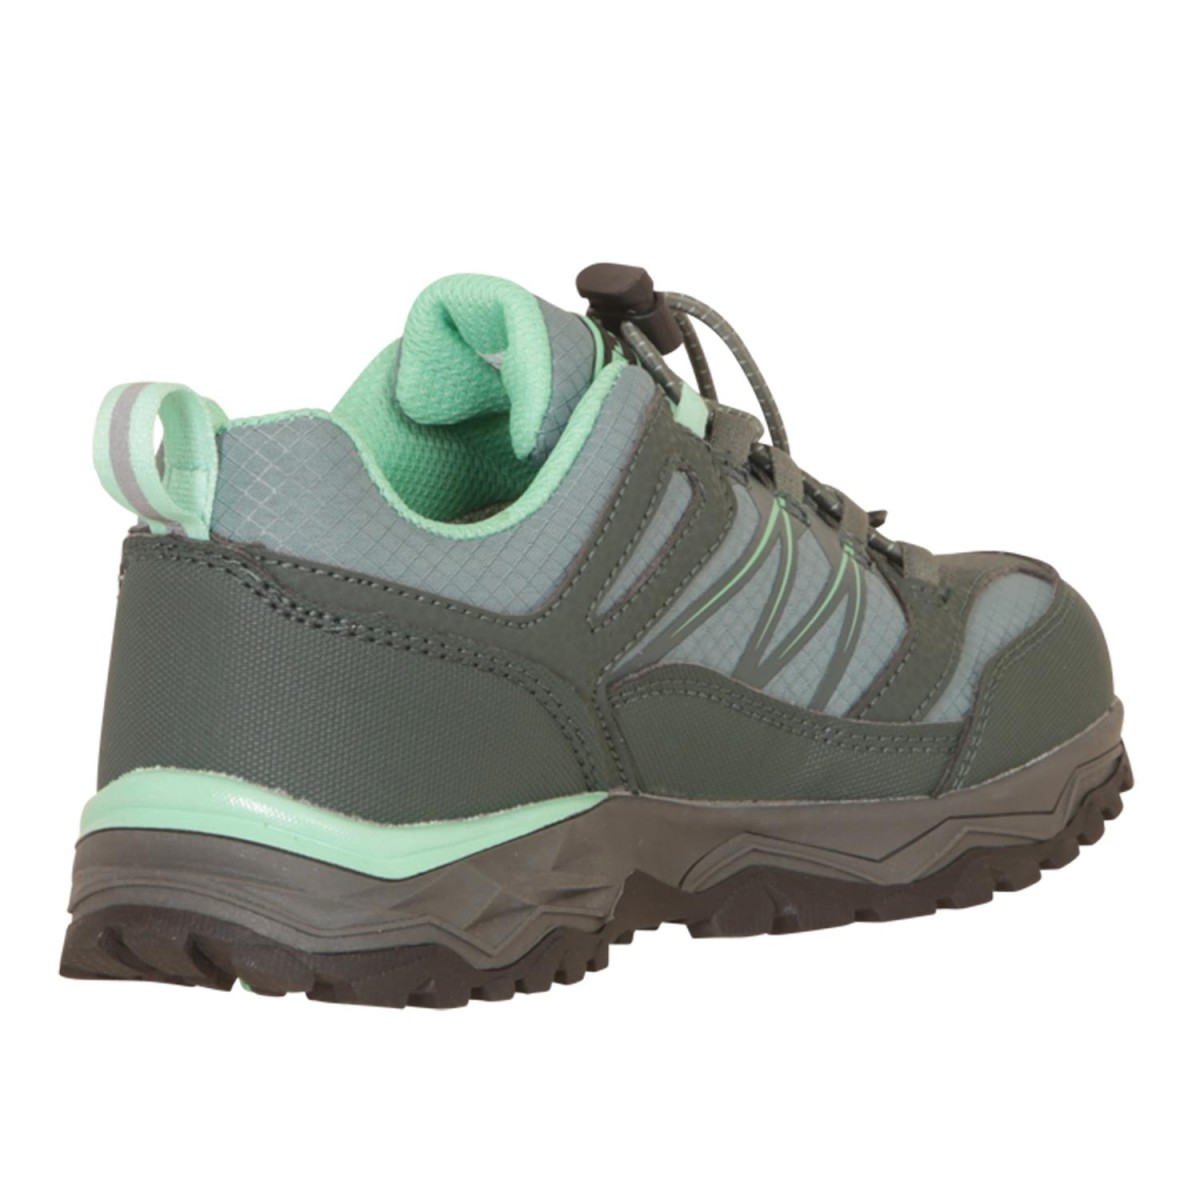 Kid's hiking trainers Cermo GRN ALPINE PRO - view 4